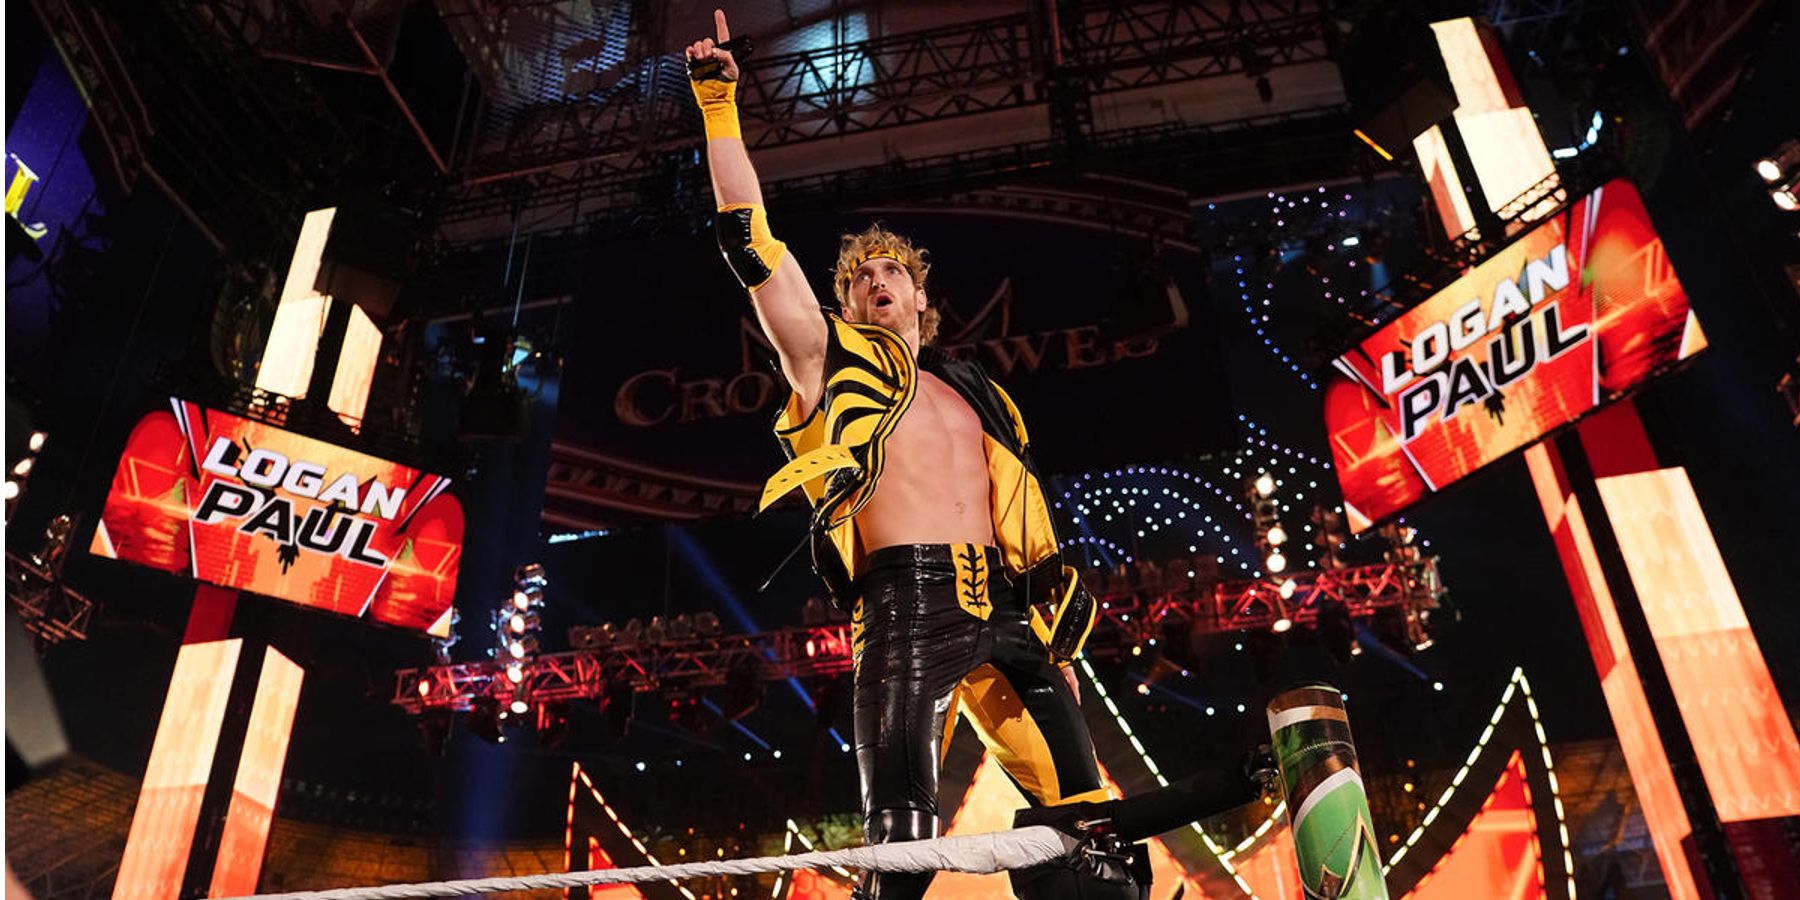 Logan Paul makes his entrance prior to wrestling Roman Reigns at WWE Crown Jewel.